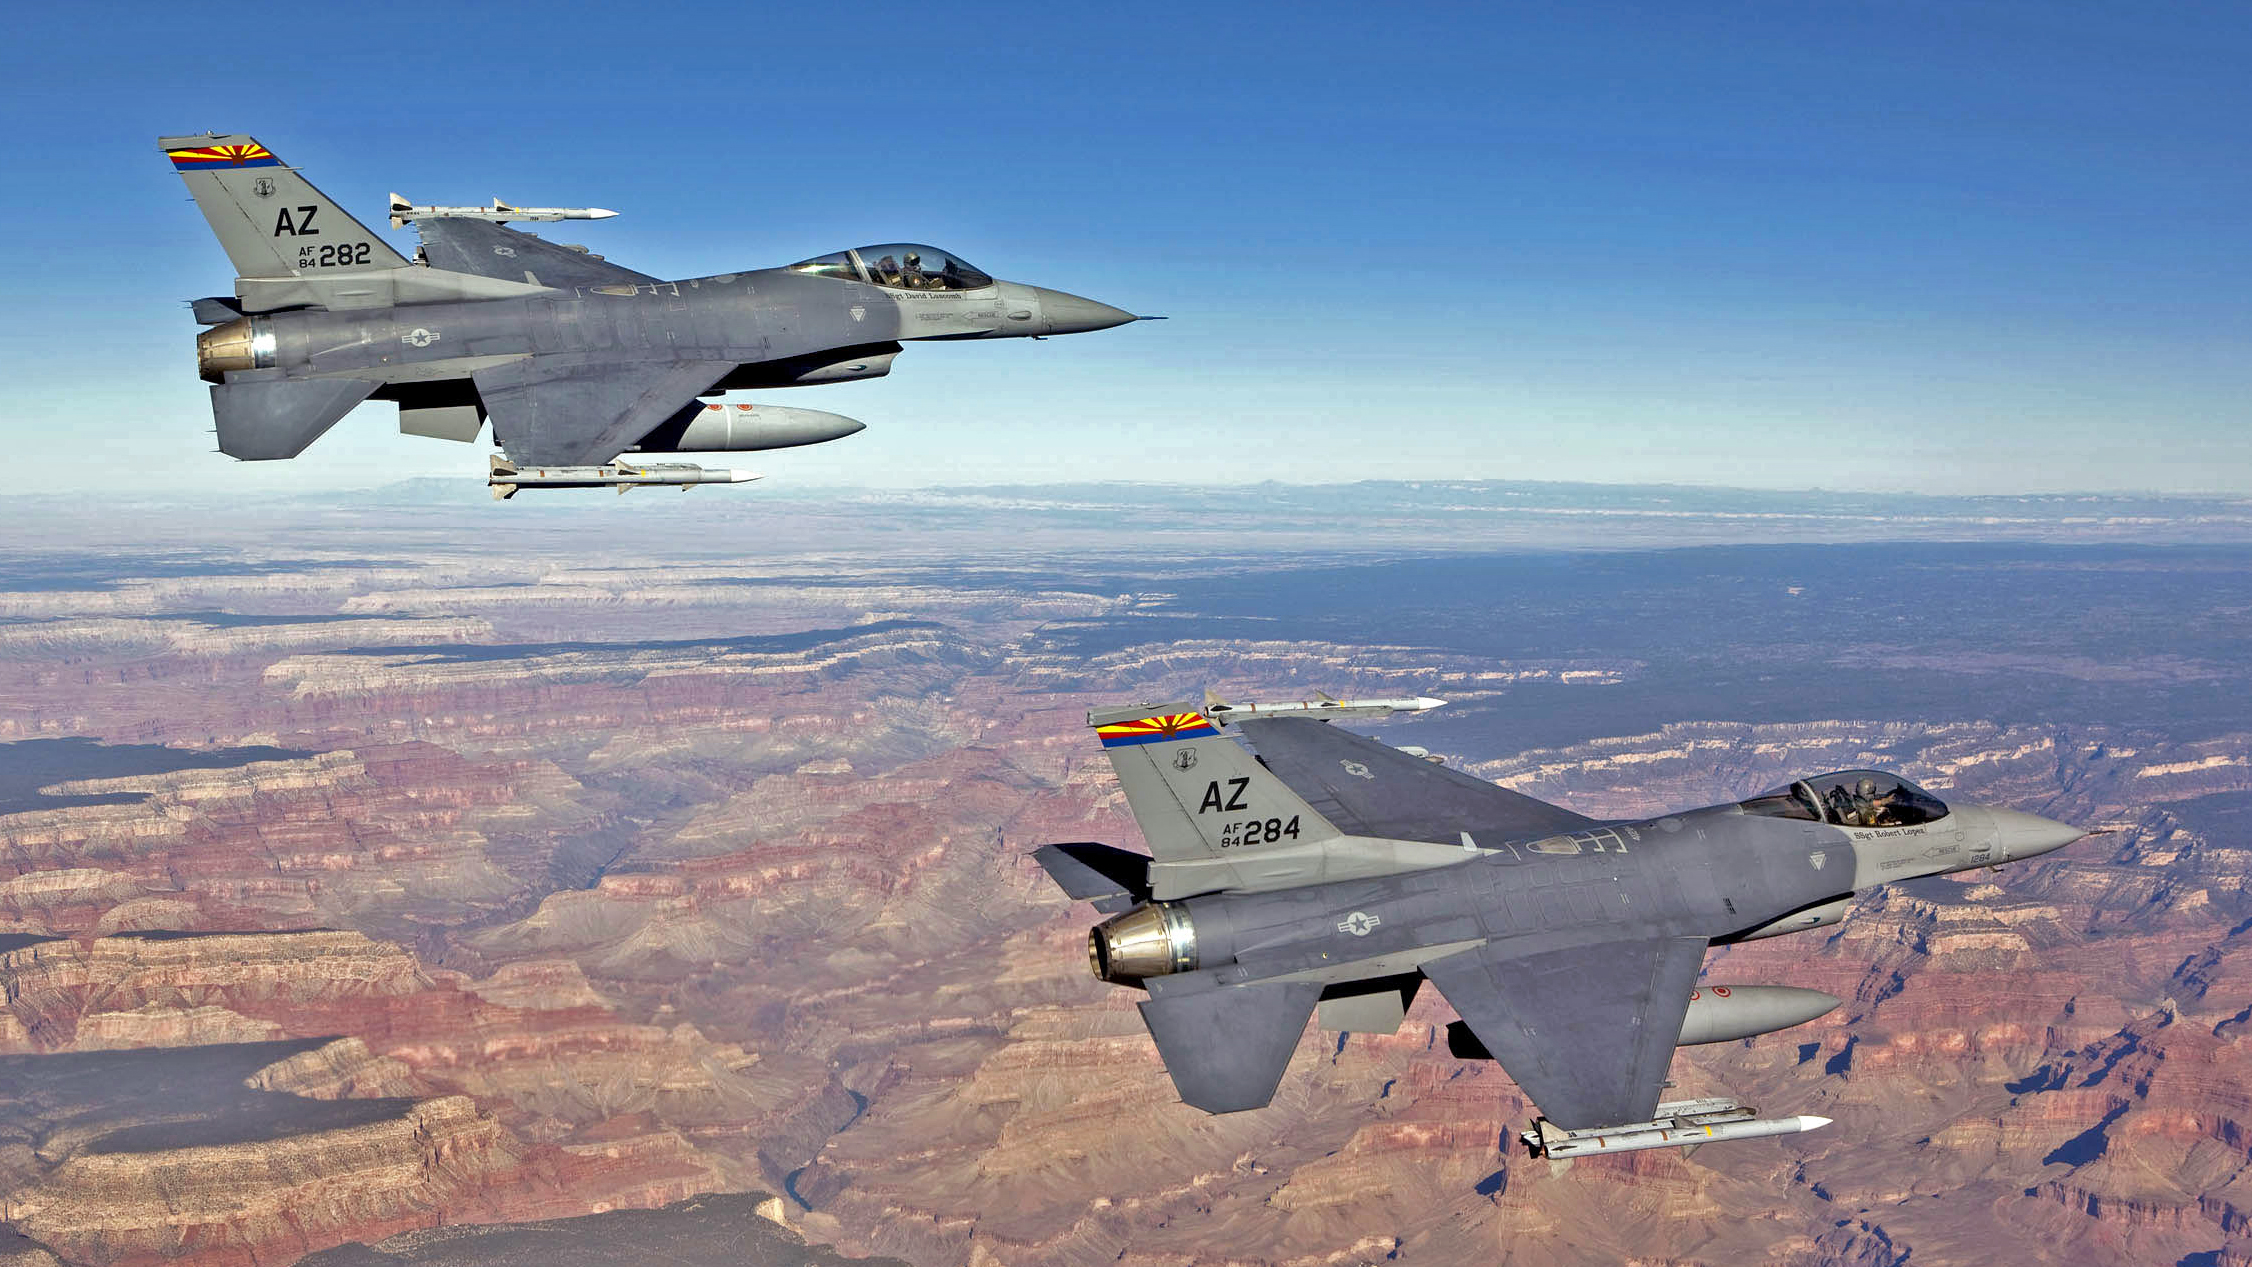 Capt. Bob Peel, left, and Lt. Col. Tony Adamo, right, F-16 instructor pilots from the 162nd Fighter Wing, fly over the Grand Canyon while supporting Operation Noble Eagle’s air sovereignty alert mission.